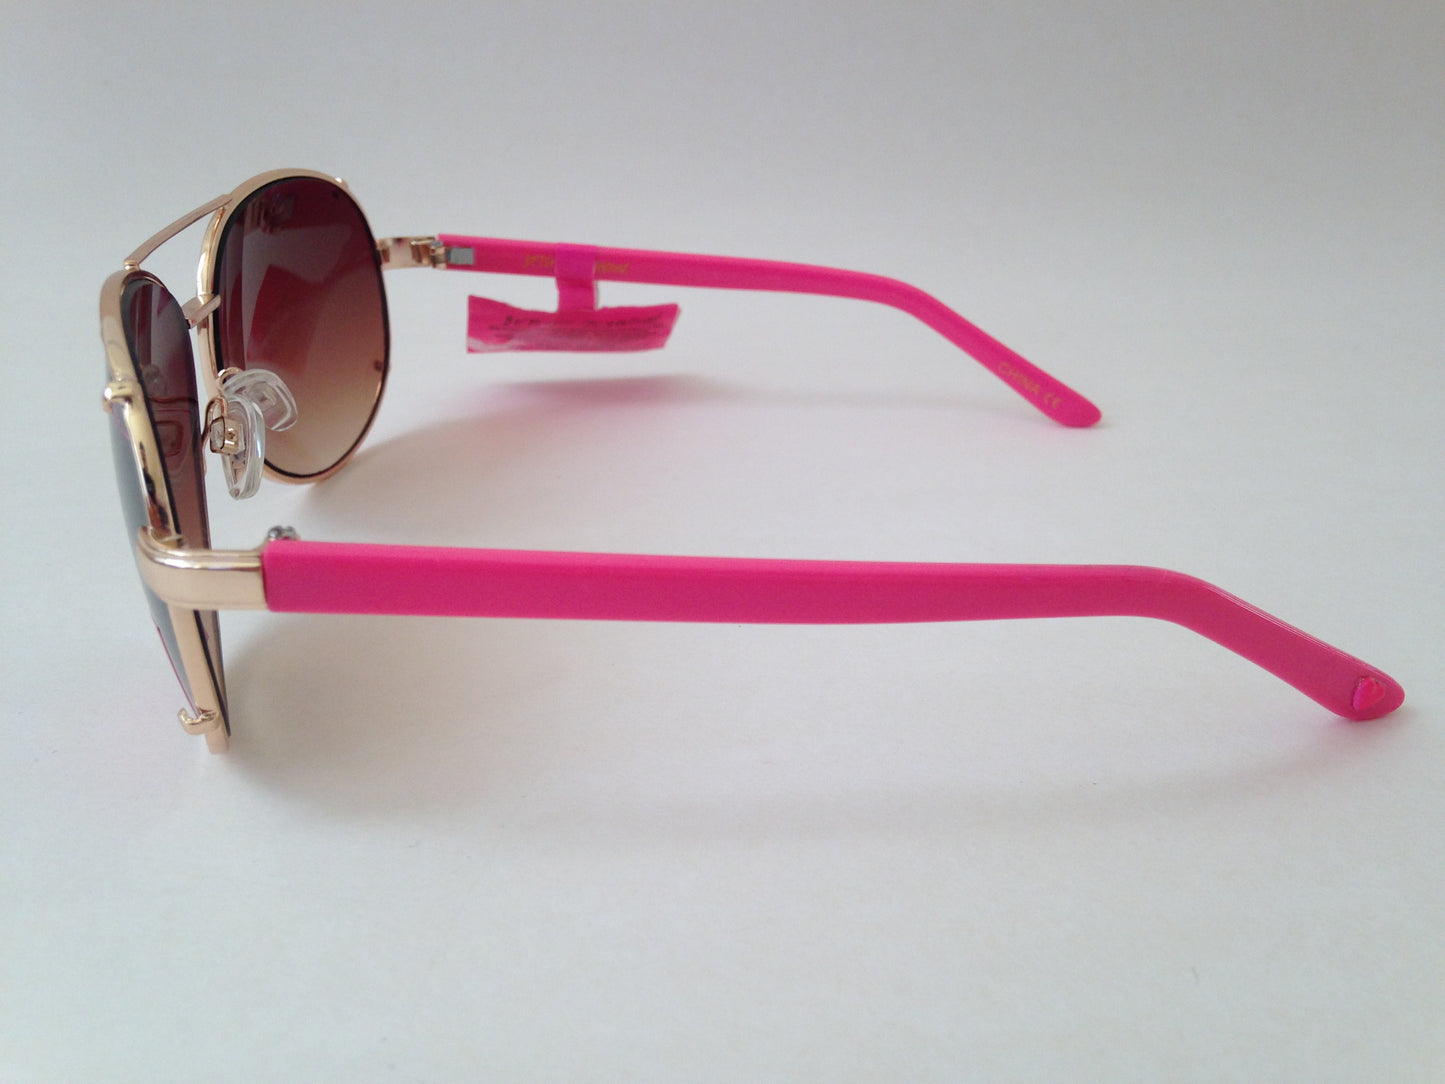 Betsey Johnson Aviator Sunglasses Gold And Pink Frame Brown Gradient Lens - Sunglasses